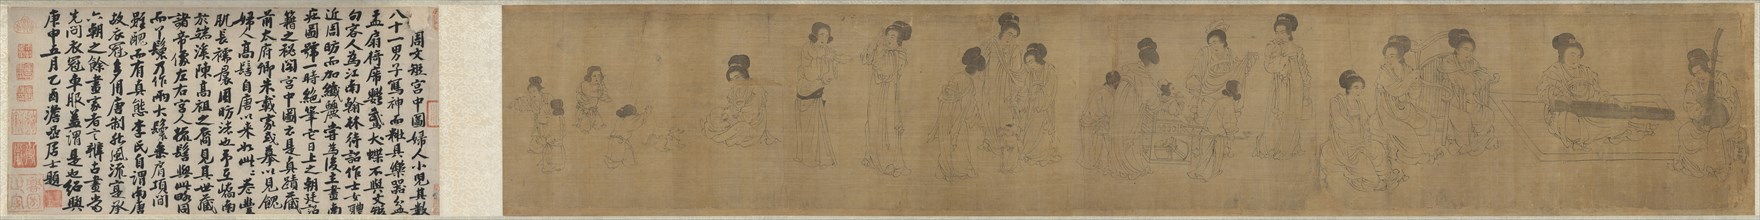 In the Palace, before 1140. After a work attributed to Zhou Wenju (Chinese, active 942-961).